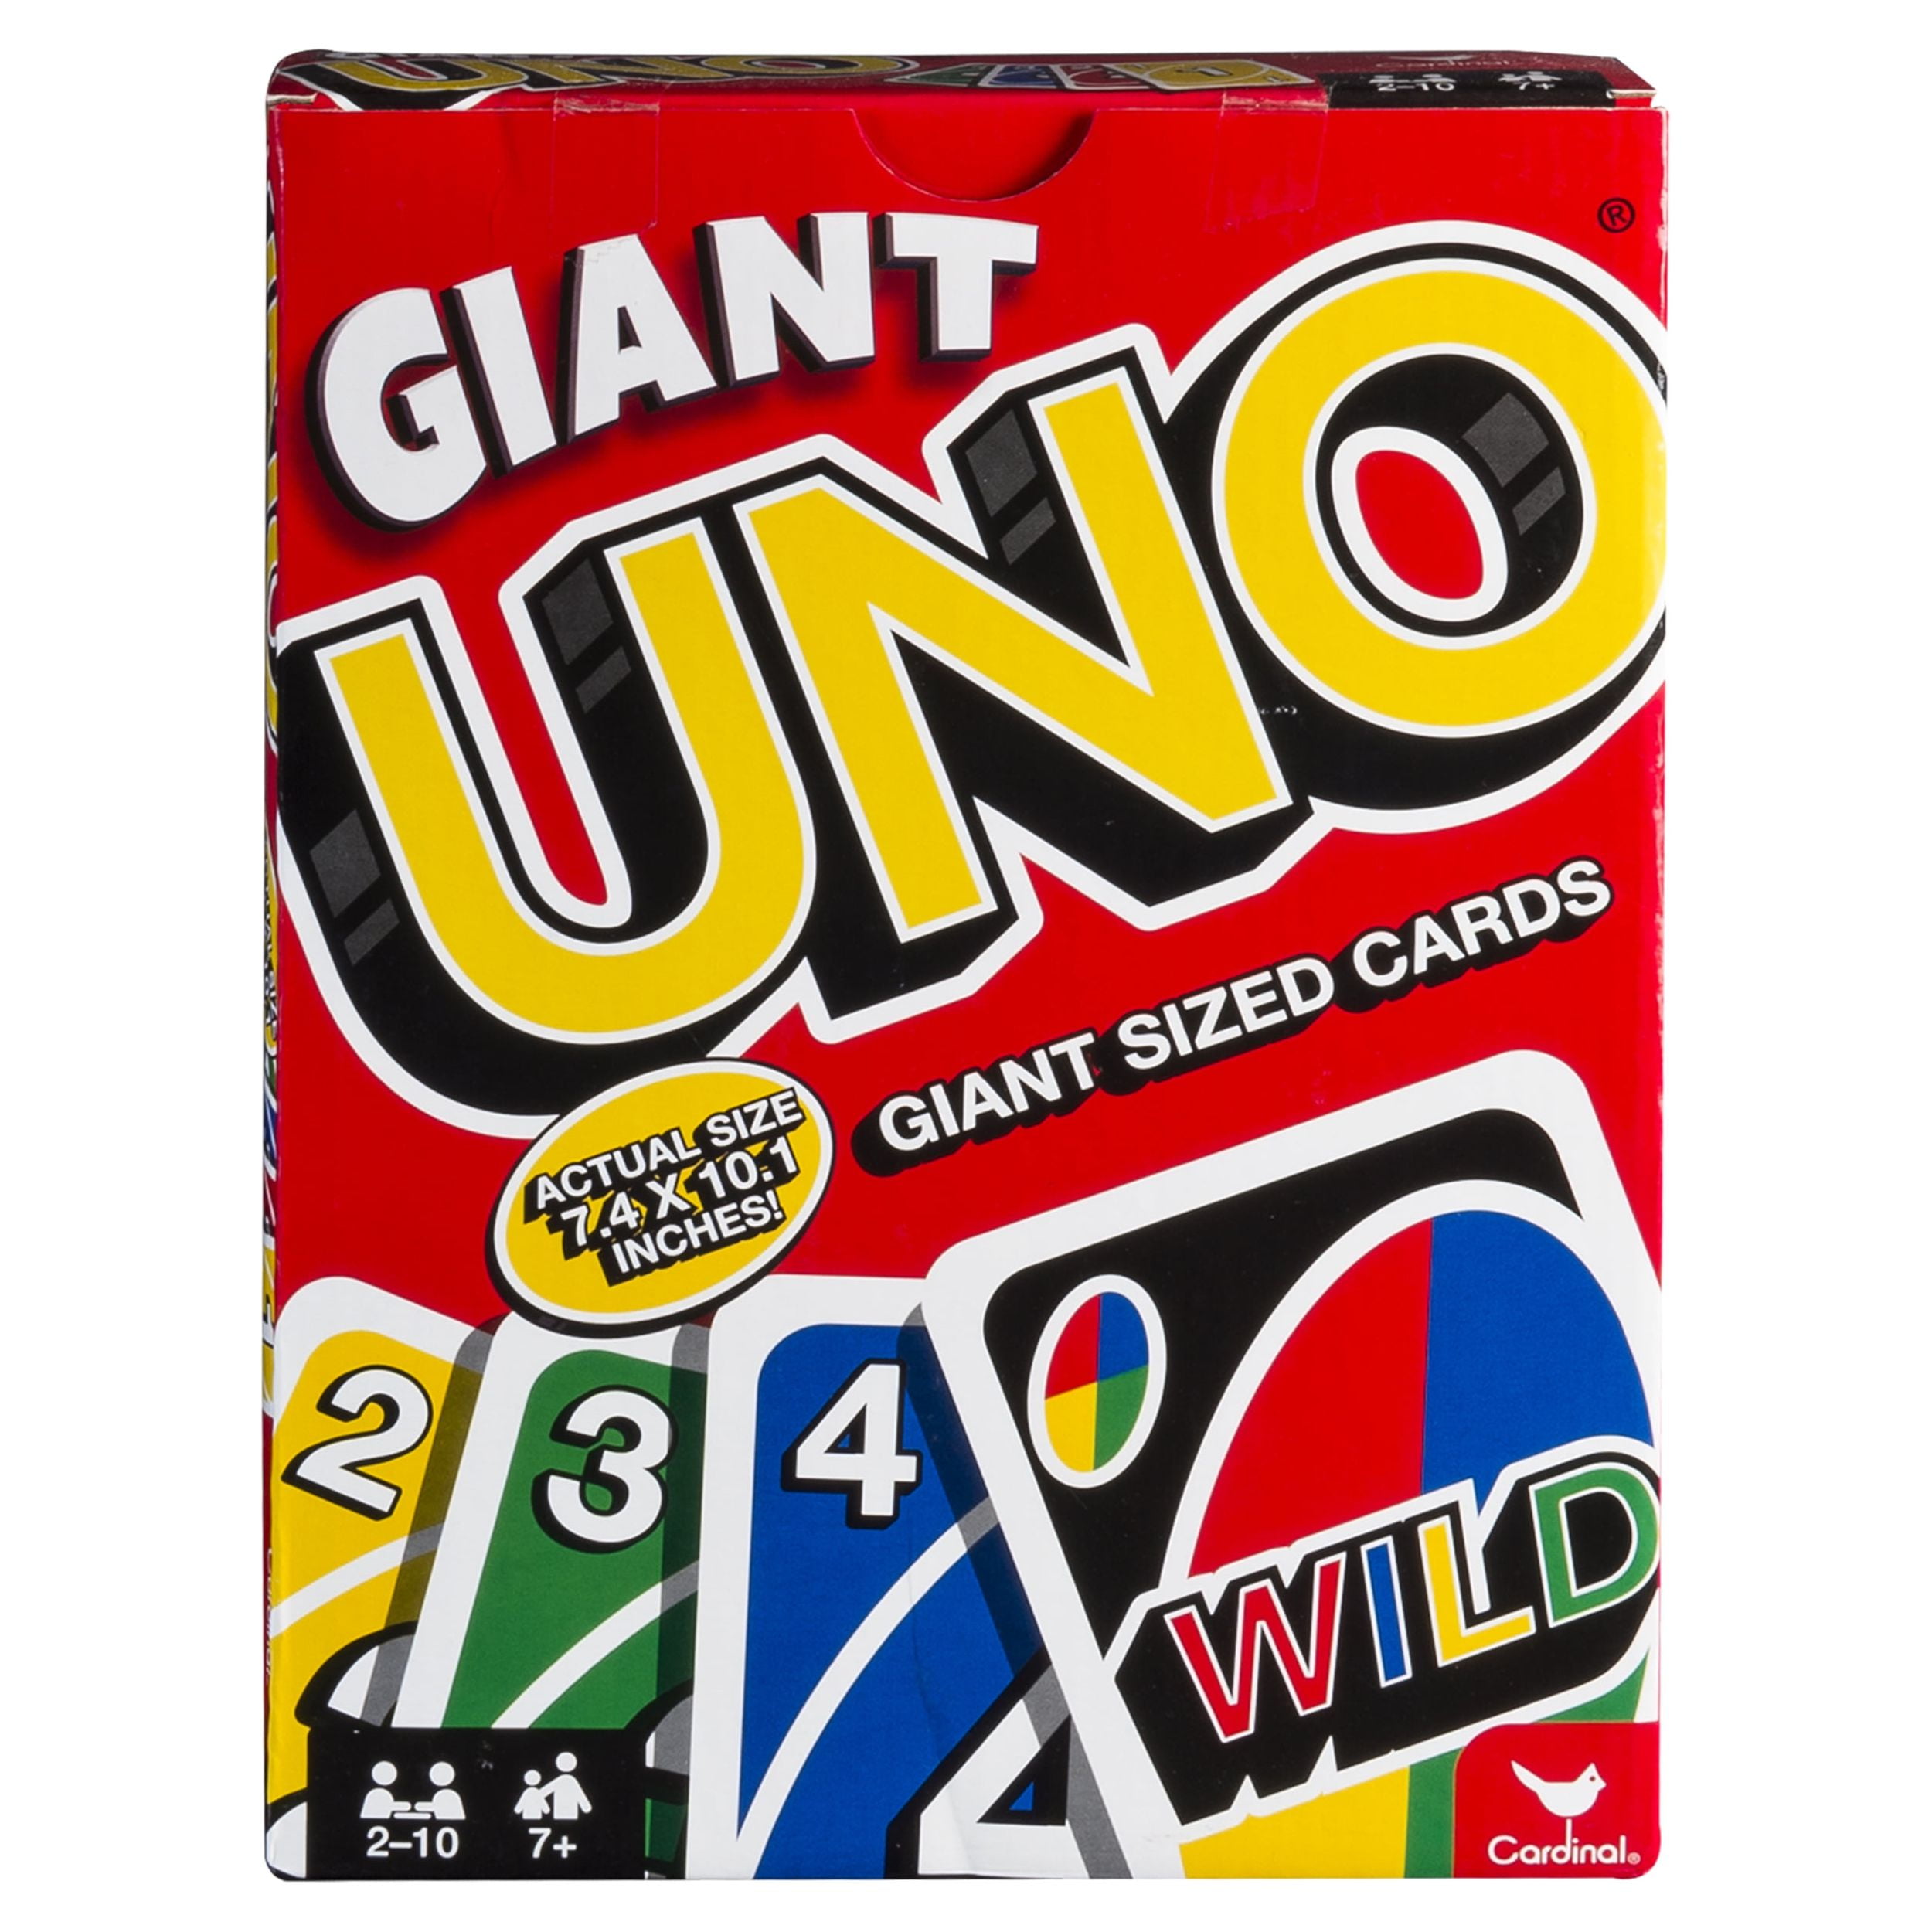 Playing UNO online in crazy games pro gaming official 